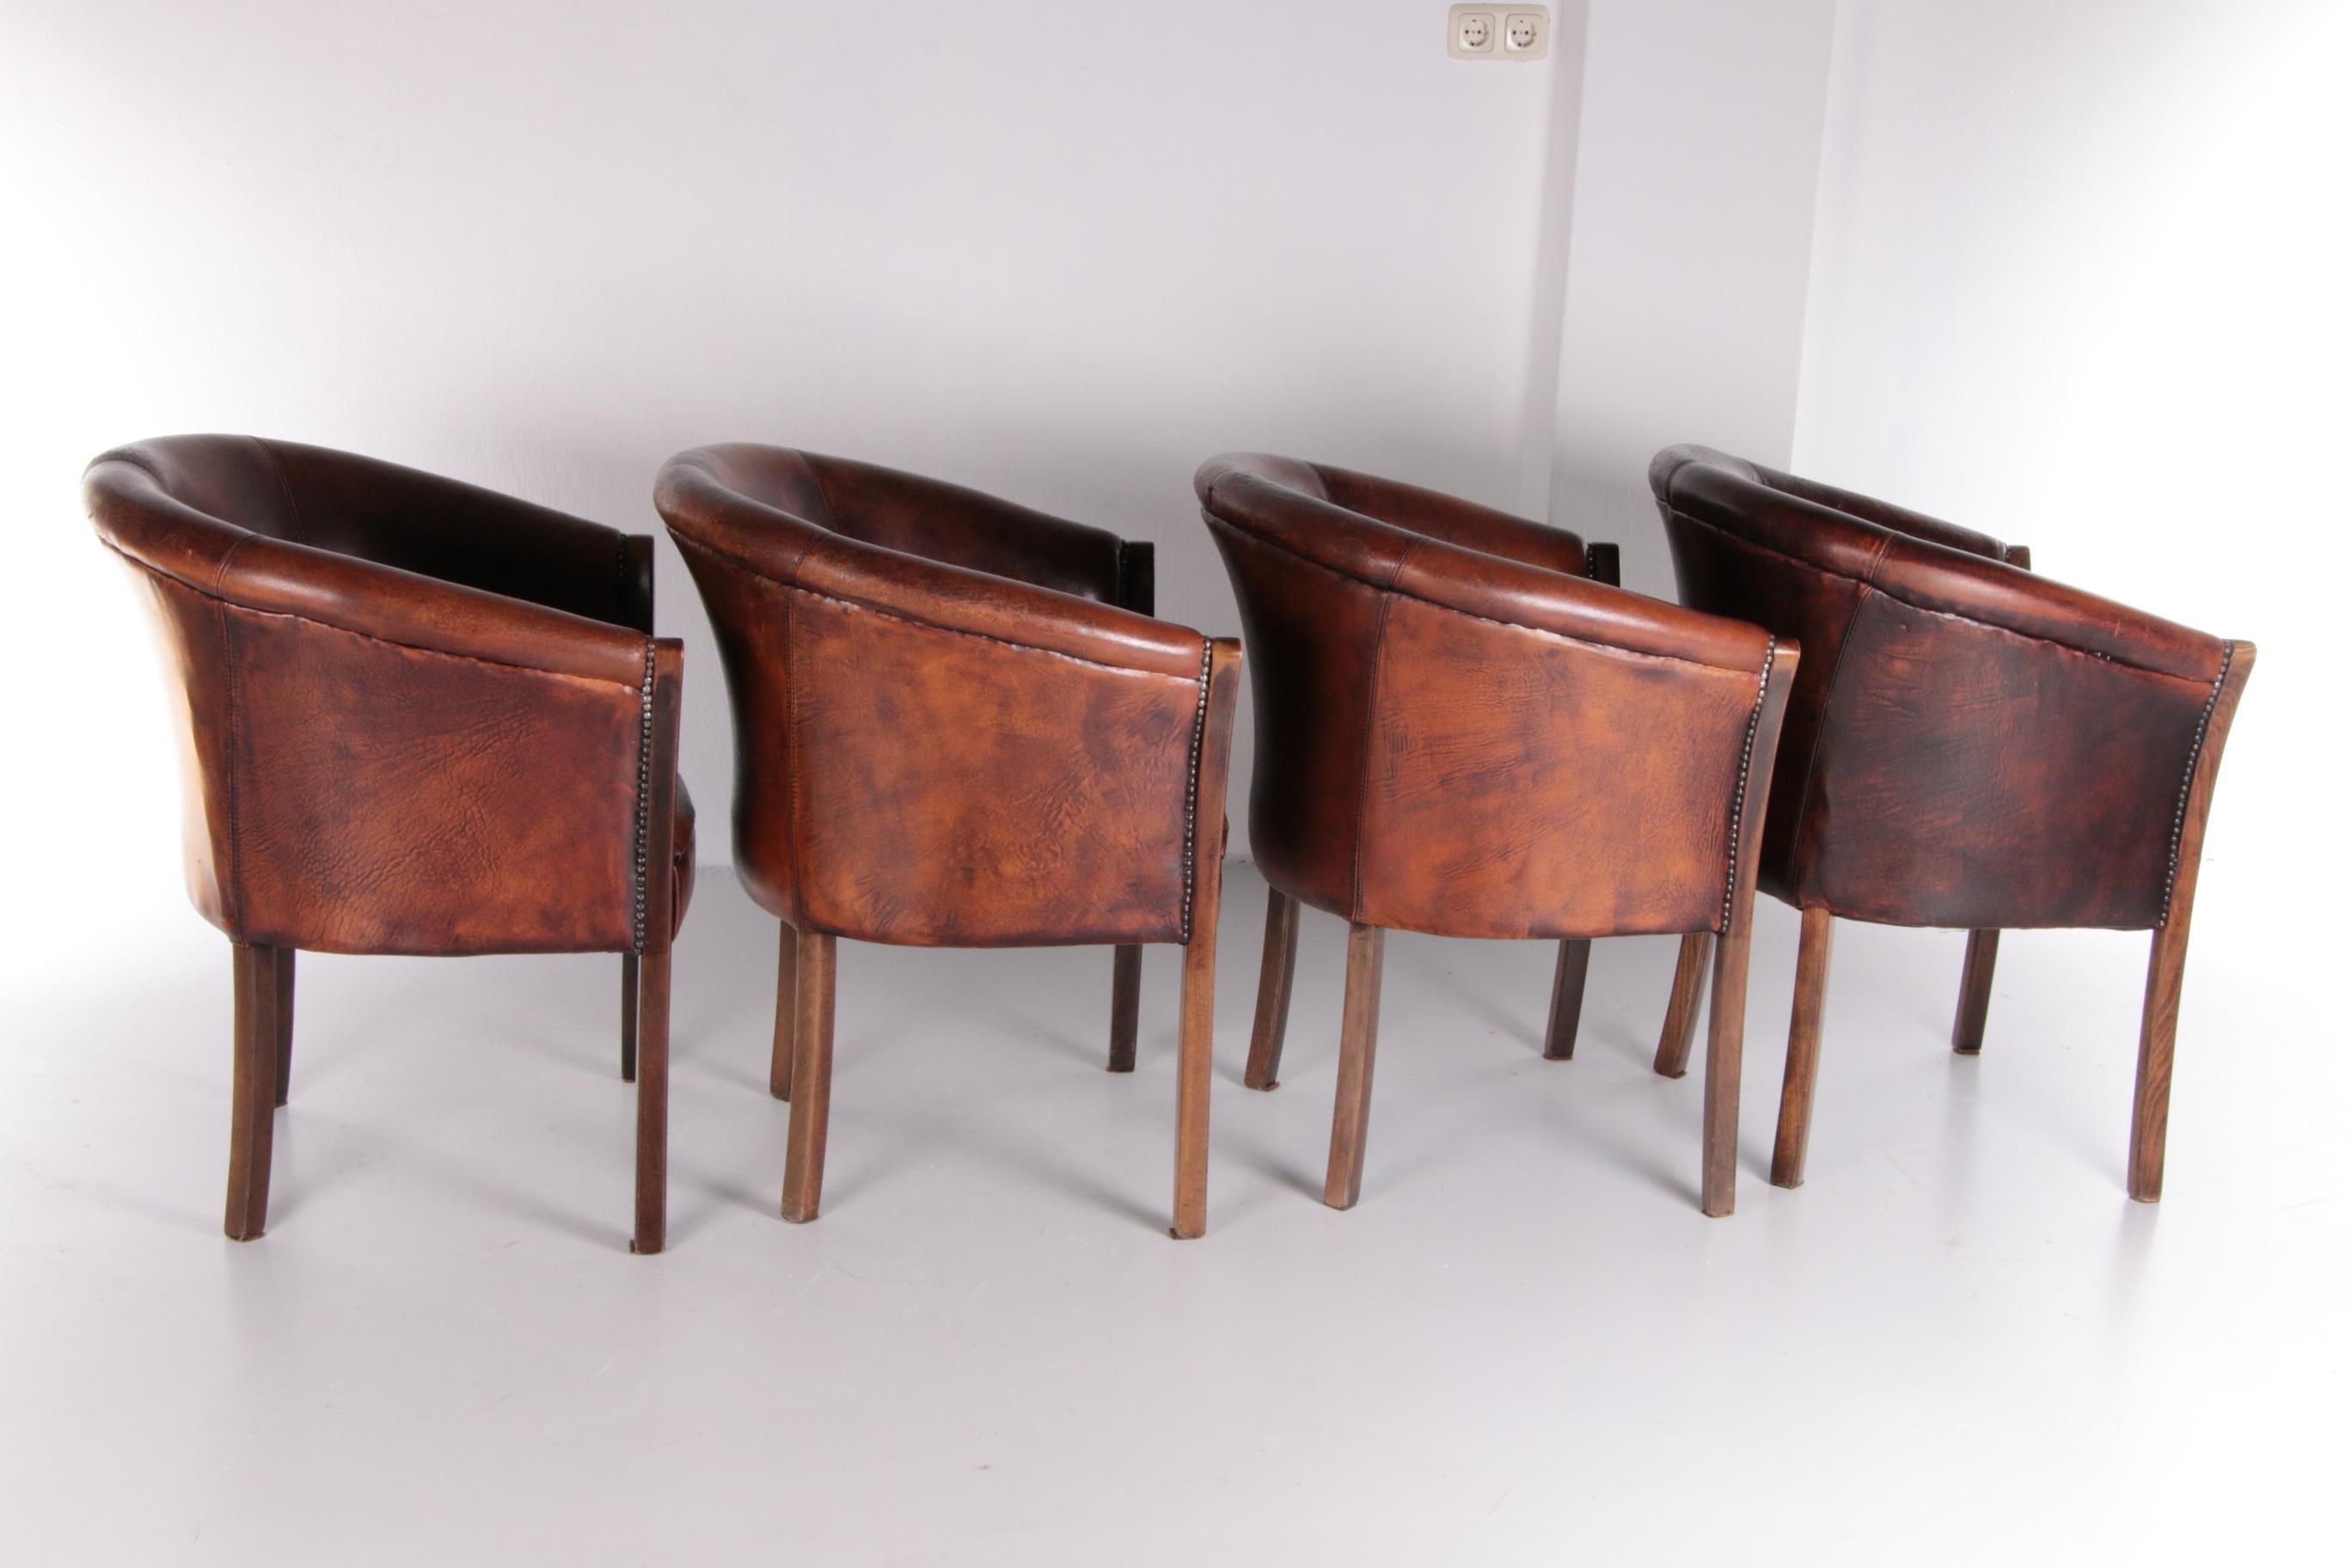 Set of 4 Sheep Leather Dining Table Chairs, 1970, Netherlands 1